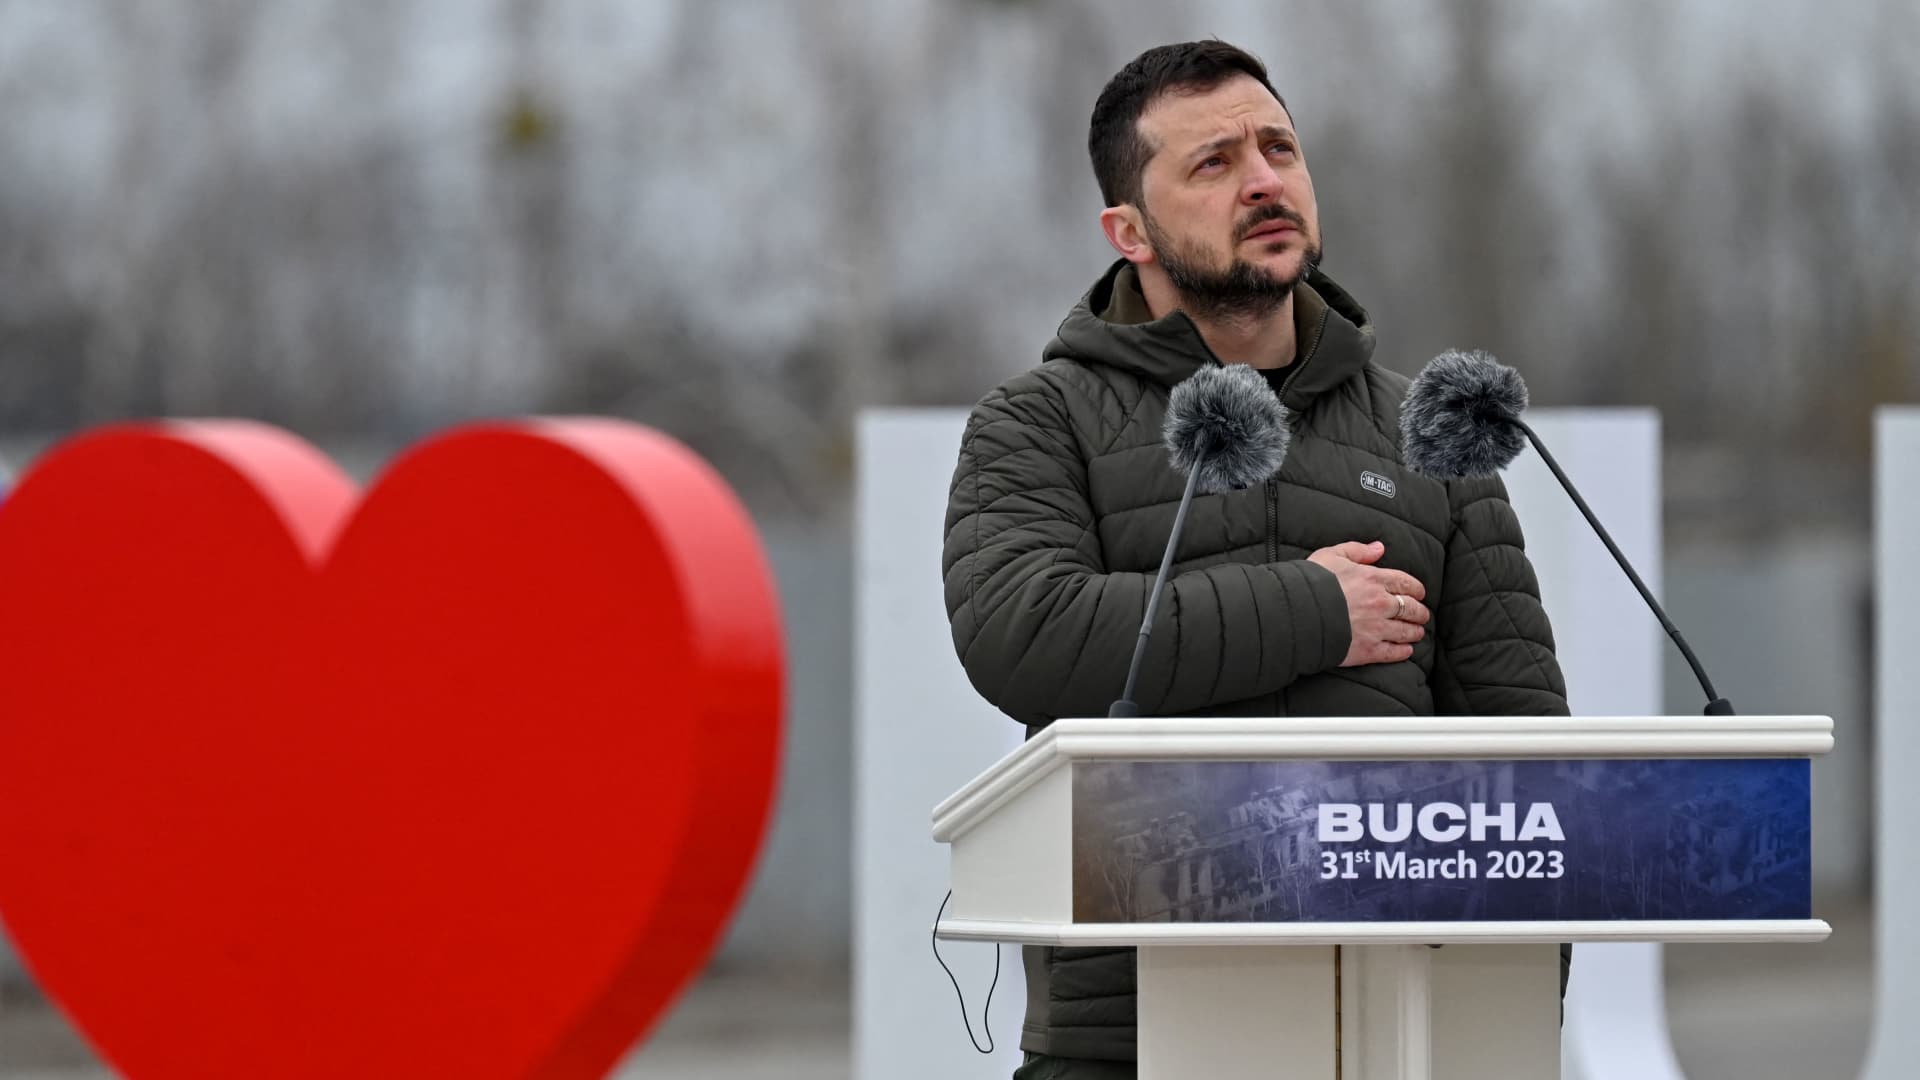 Ukrainian President Volodymyr Zelensky attends a ceremony marking the first anniversary of the retreat of Russian troops from the Ukrainian town of Bucha, in Bucha, near Kyiv, on March 31, 2023. 